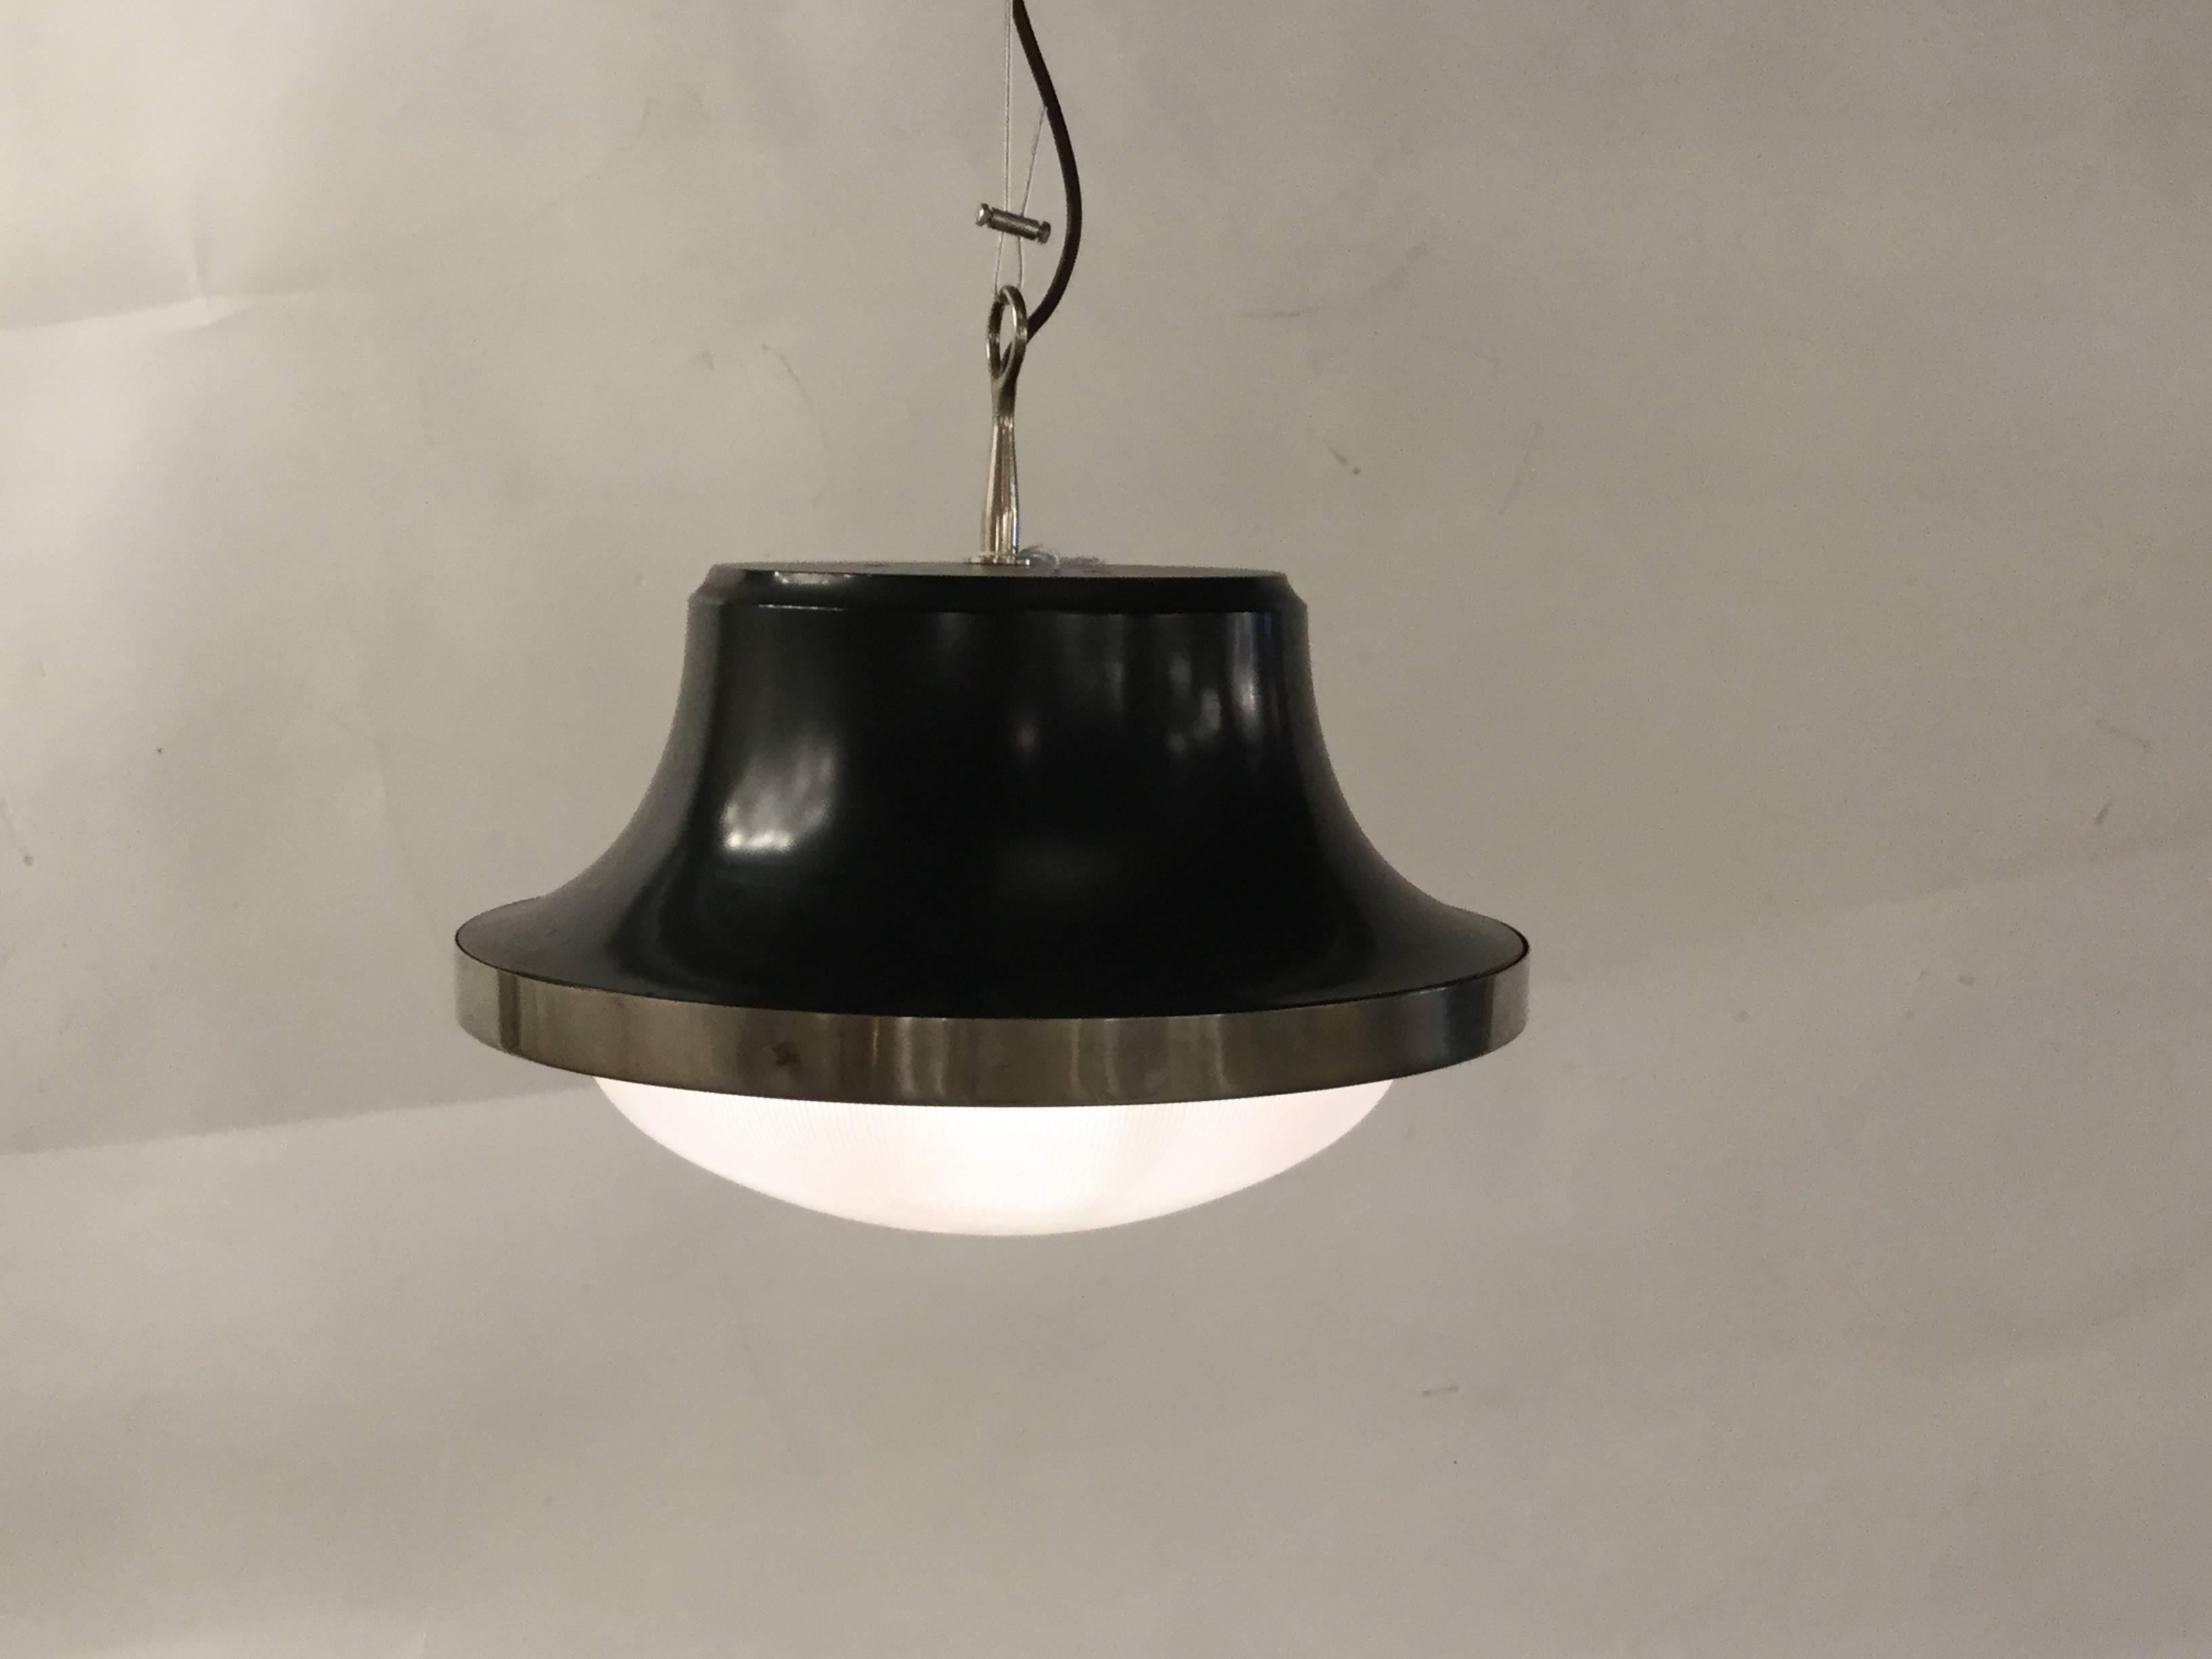 A model 'Tau pendant lamp by Sergio Mazza for Artemide. The lamp has a black lacquered aluminium shade with a nickel plated brass ring around and a pressed, striped glass diffuser. It hangs from a metal wire.

The measurements stated are of the